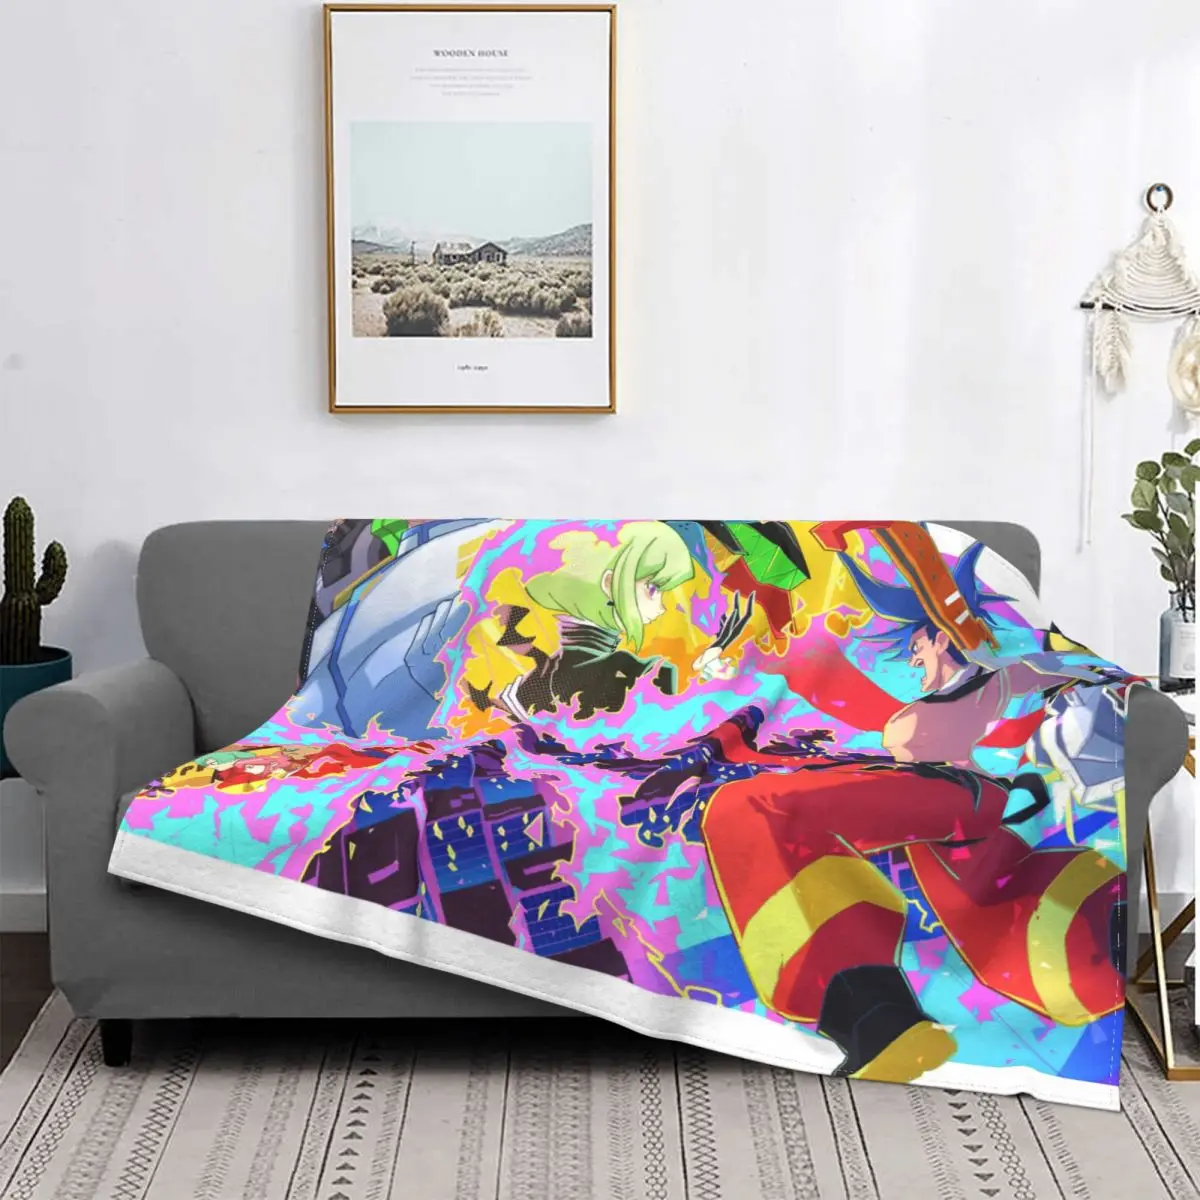 

Promare Galo Thymos Science Fiction Movie Blankets Coral Fleece Plush Decoration Bedroom Bedding Couch Bedspread